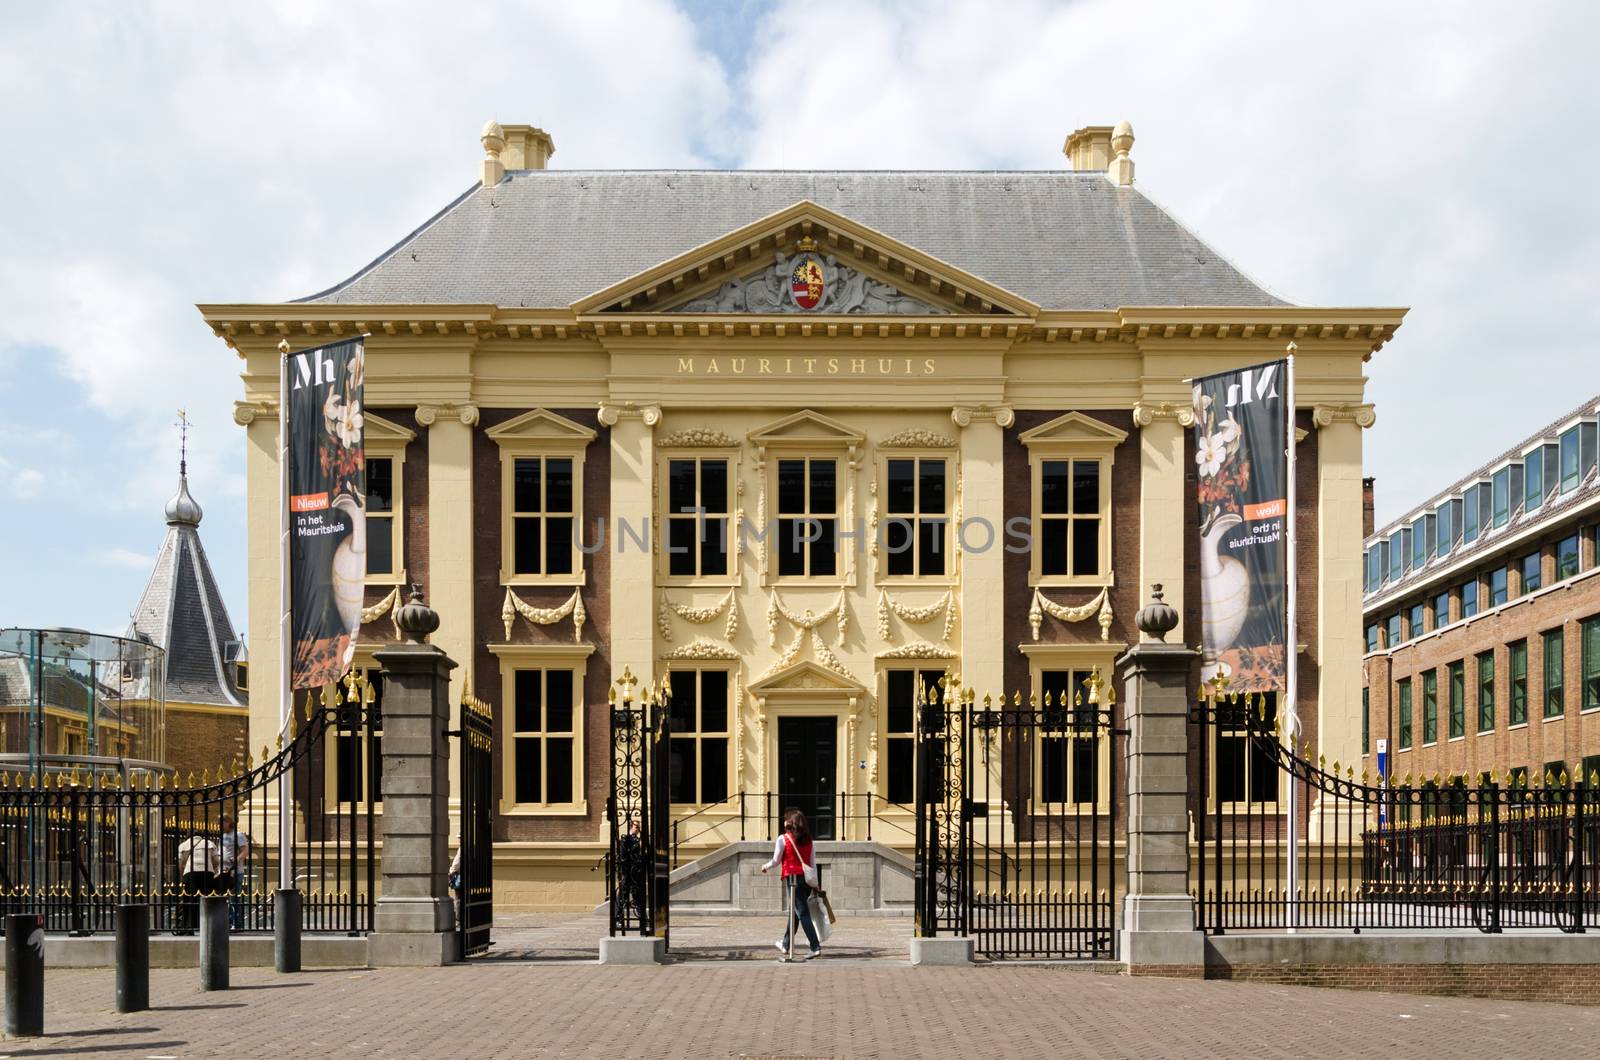 The Hague, Netherlands - May 8, 2015: Tourist visit Mauritshuis Museum in The Hague, Netherlands. The museum houses the Royal Cabinet of Paintings which consists of 841 objects, mostly Dutch Golden Age paintings.